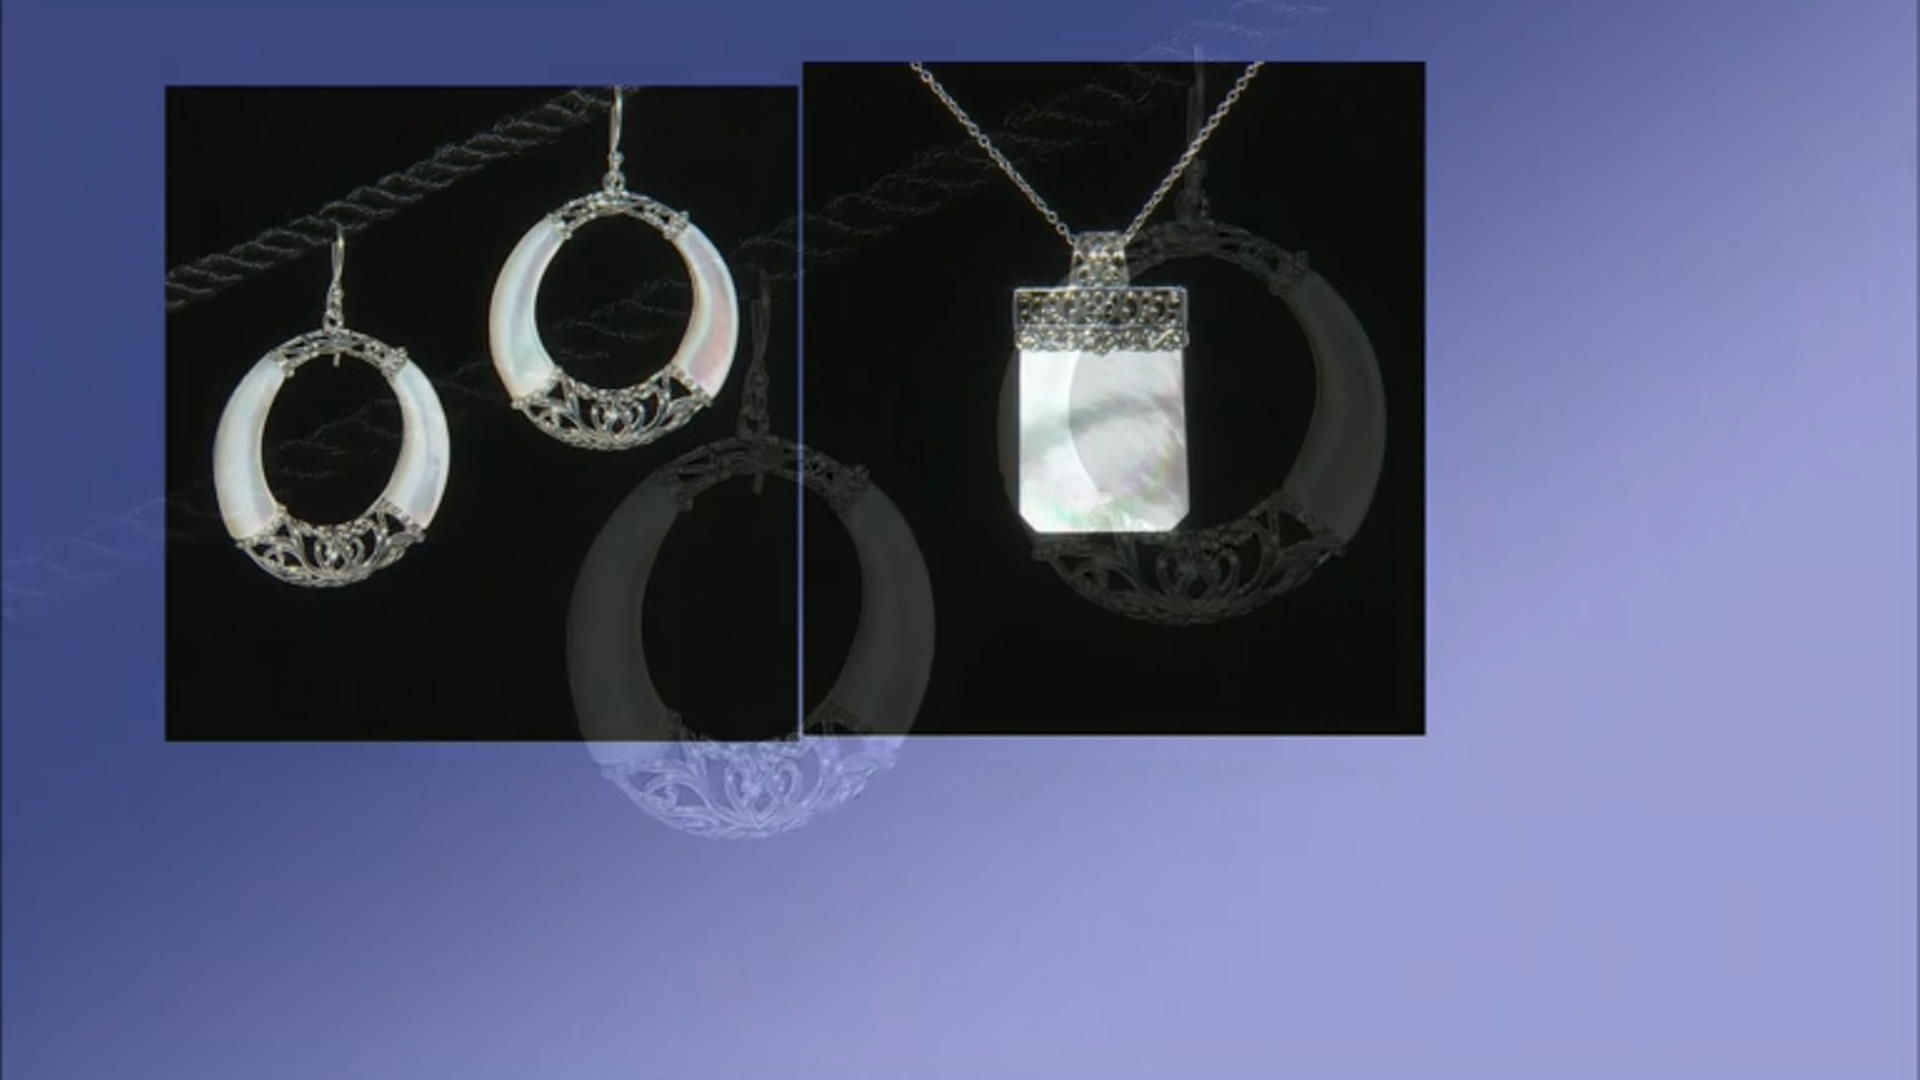 White Mother-of-pearl Rhodium Over Sterling Silver Dangle Earrings Video Thumbnail